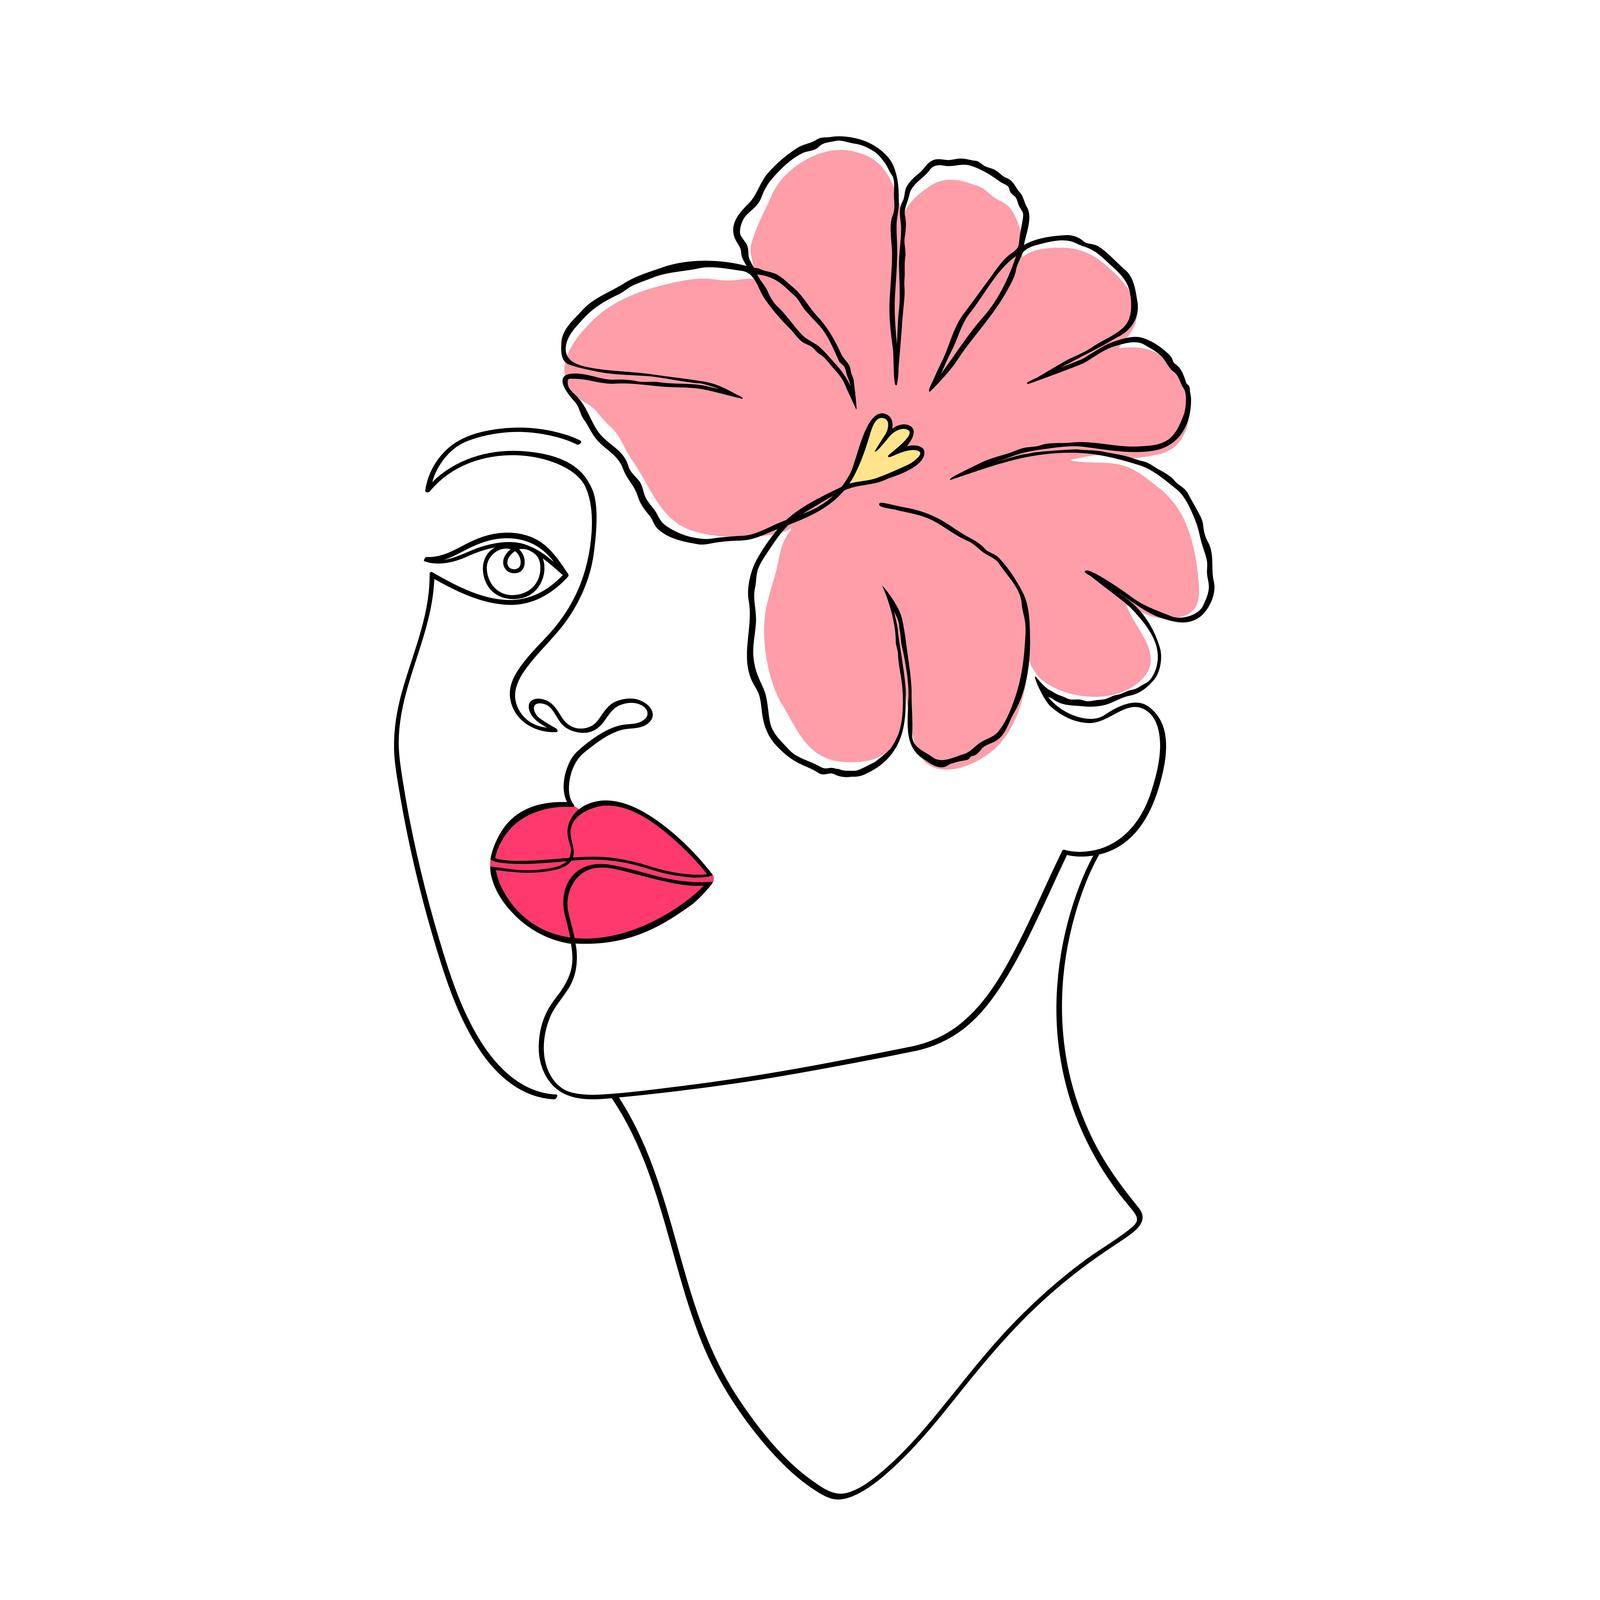 Woman face in minimal line art style on white background.